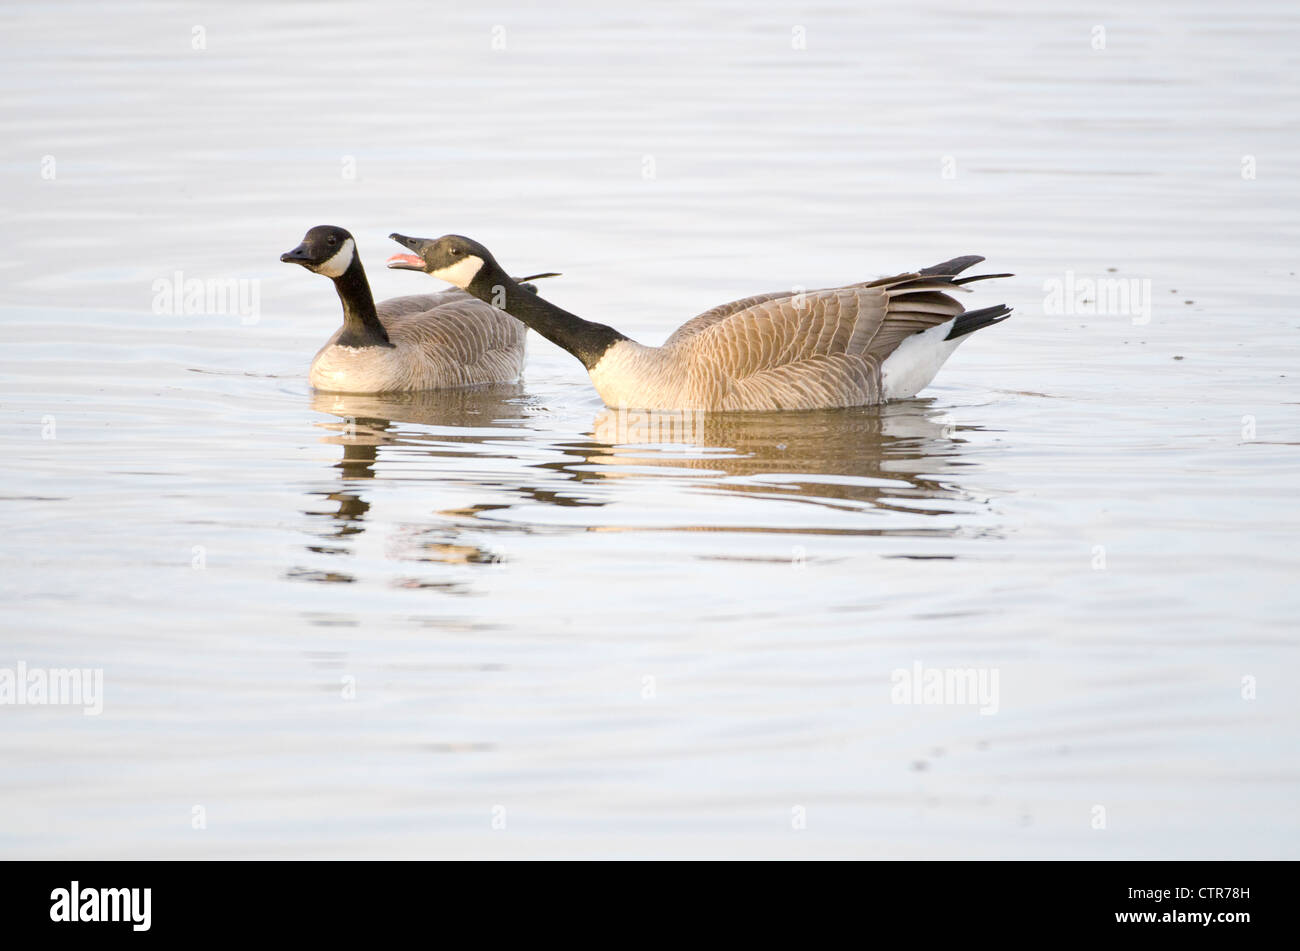 One Canada Goose honks aggressively at another, Creamer's Field Migratory Waterfowl Refuge, Fairbanks, Alaska, Spring Stock Photo